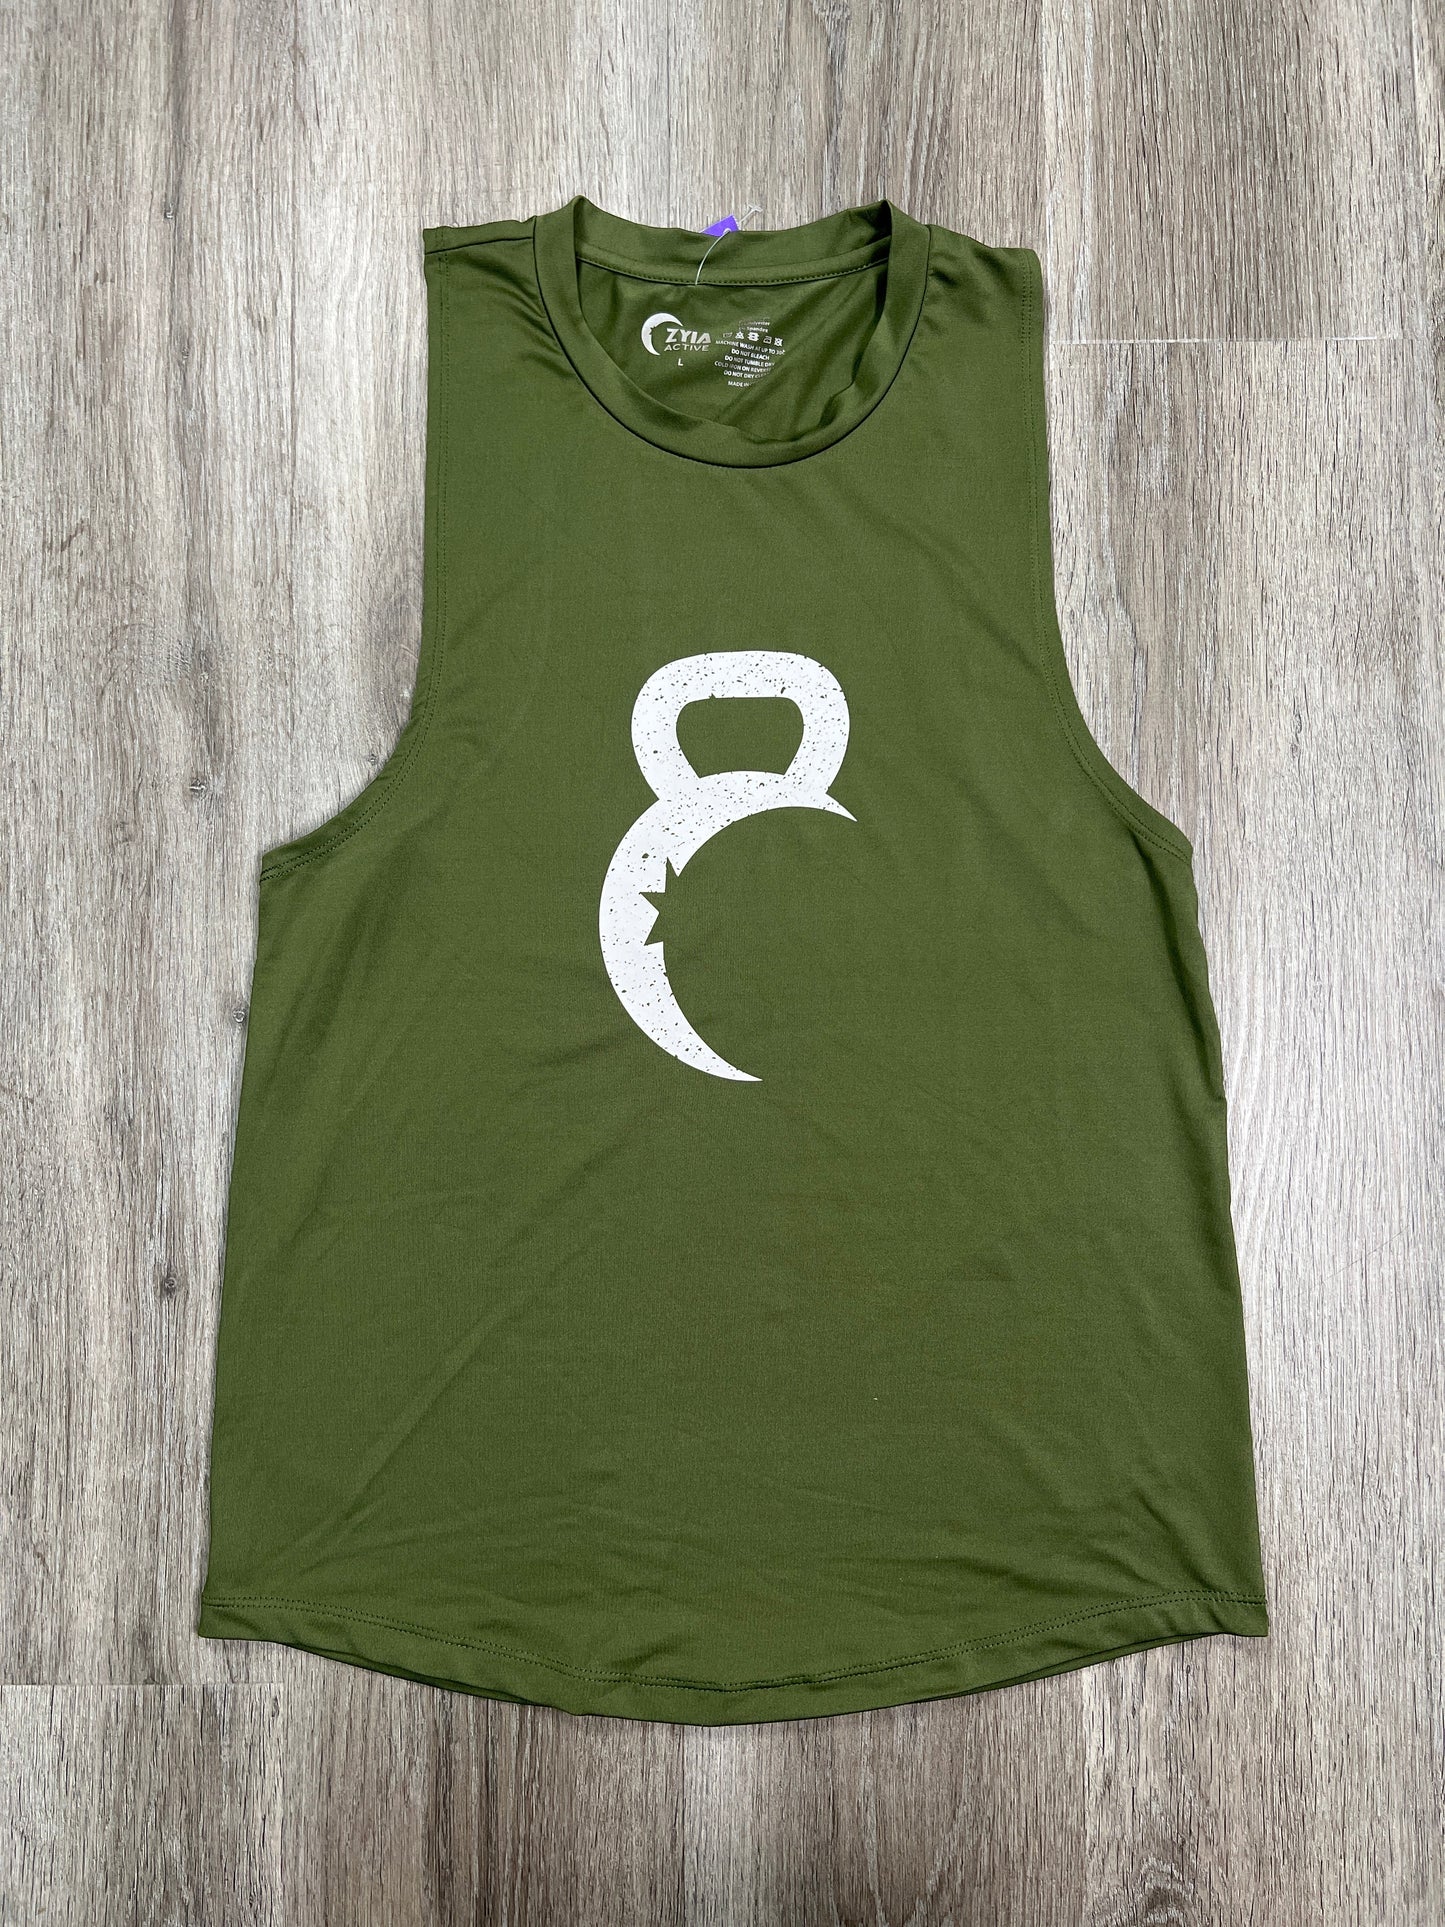 Green Athletic Tank Top Zyia, Size L